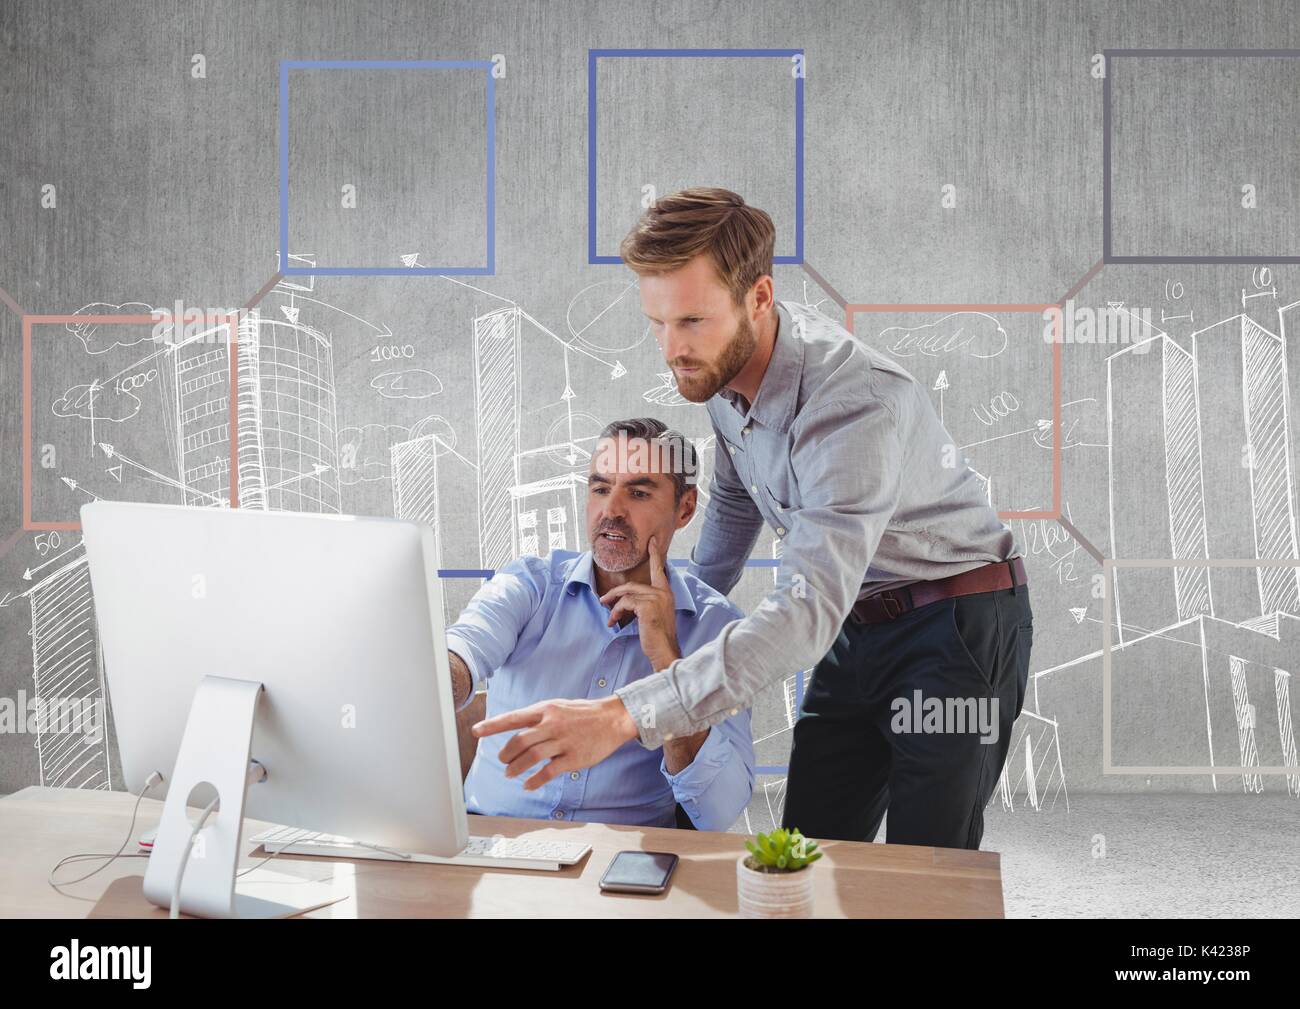 Digital composite of Businessmen and Colorful mind map over city drawings background Stock Photo